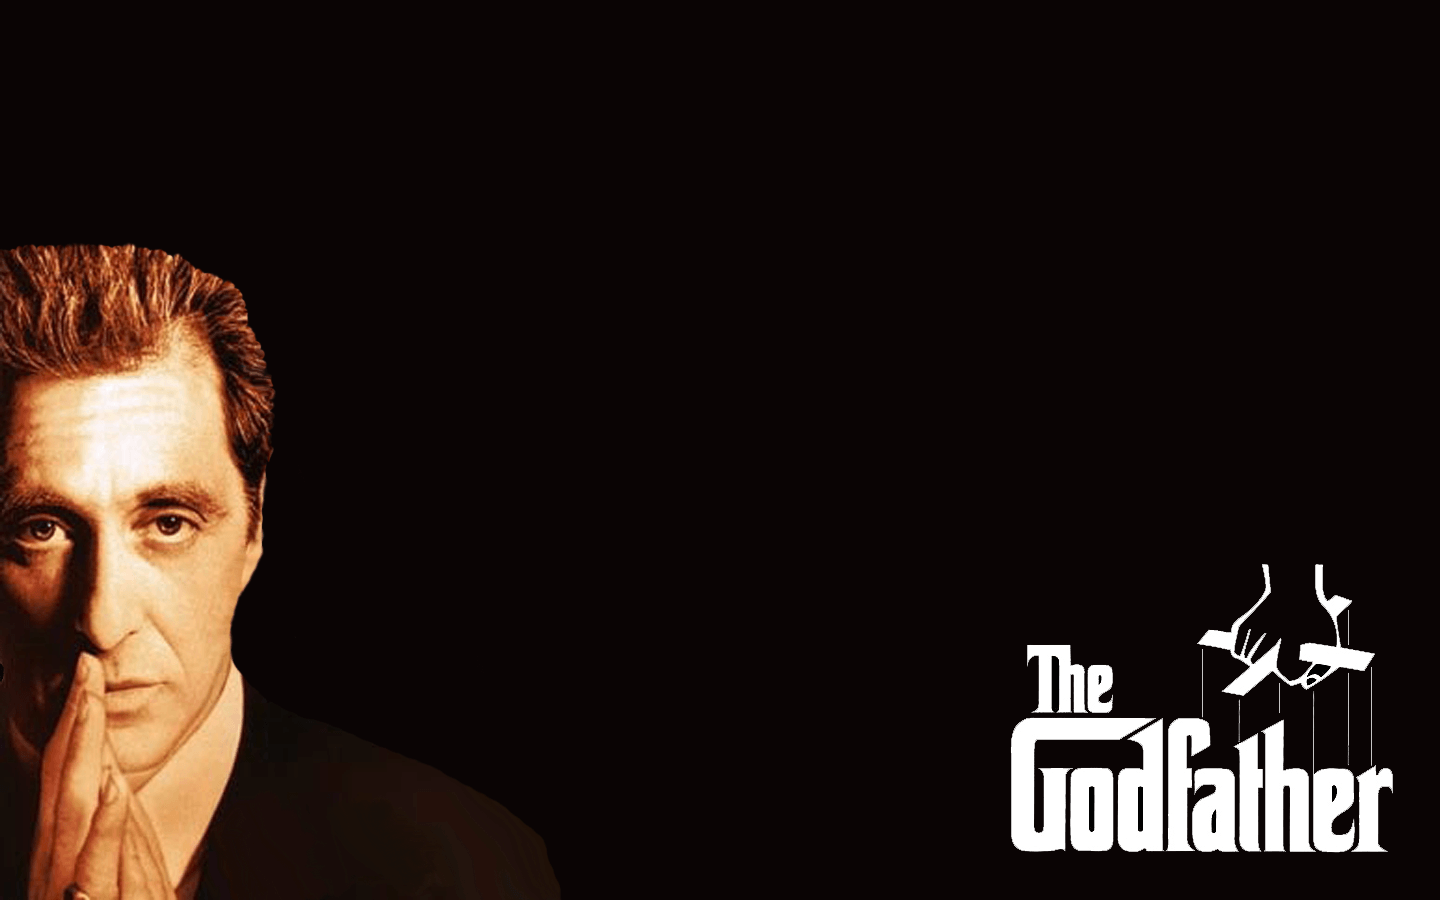 Request The Godfather Wallpaper